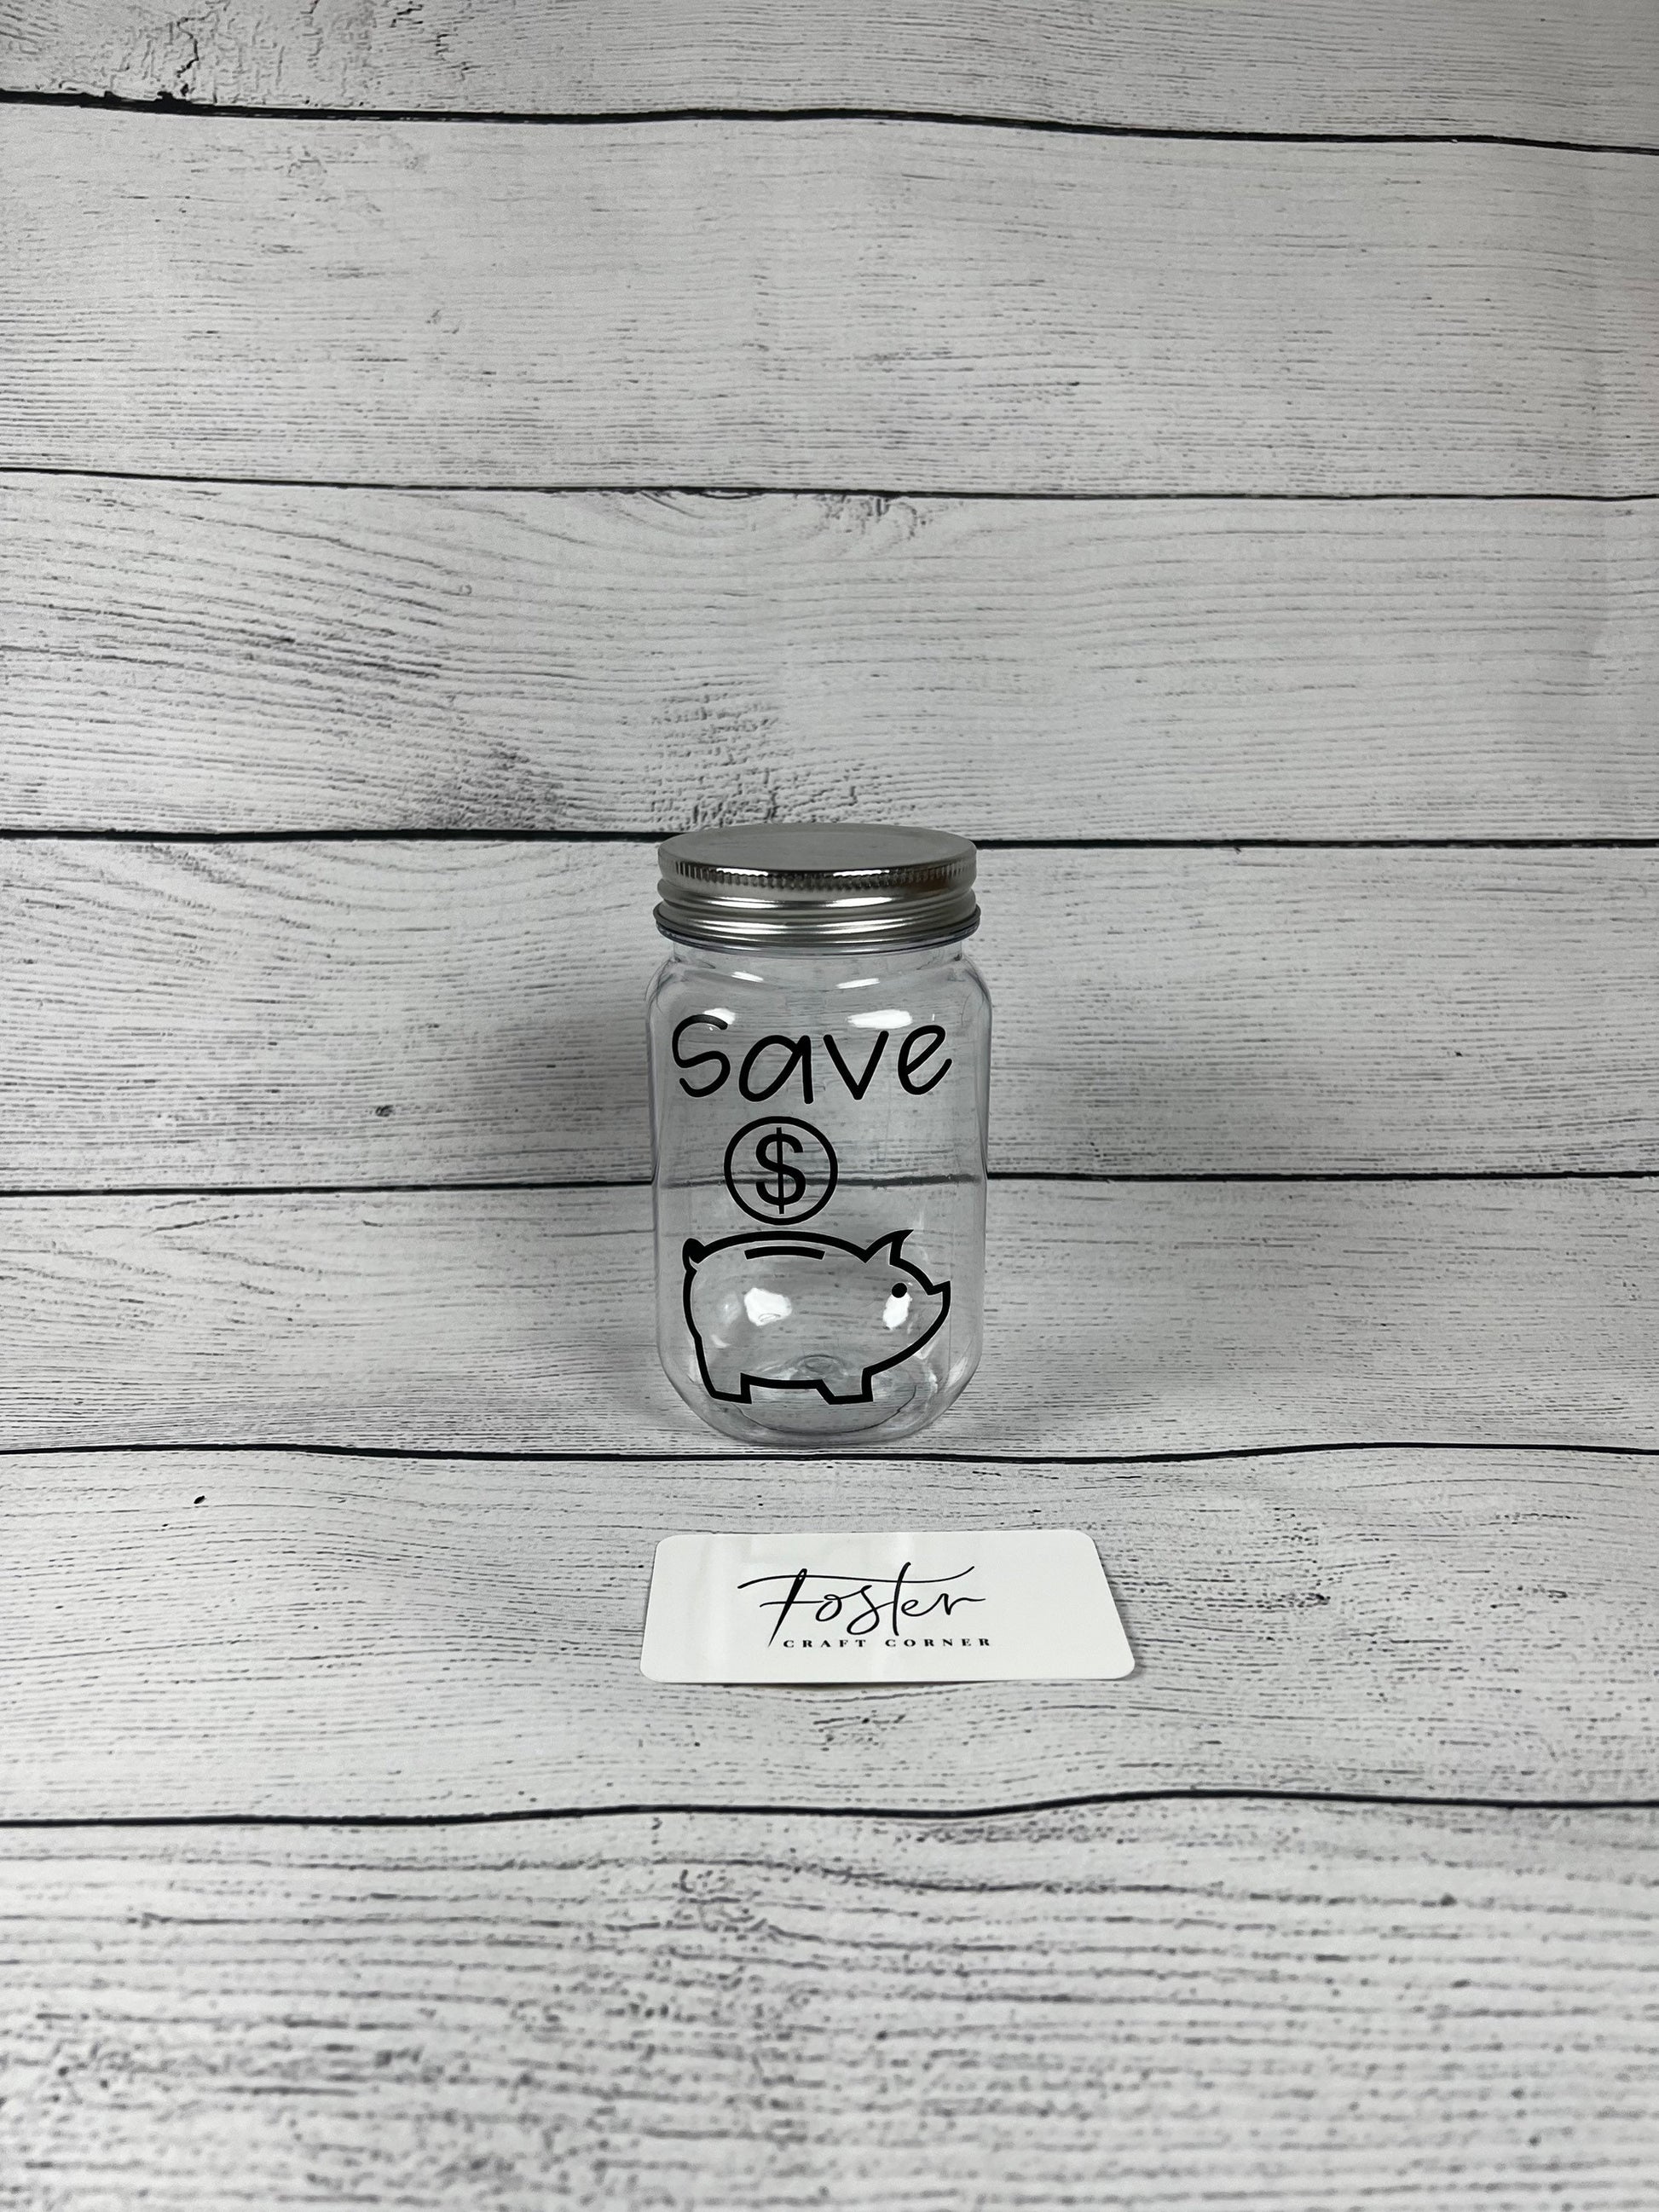 Plastic Save, Give and Spend Jars - Save Jar - Spend Jar - Give Jar - Money - Lesson - Teaching - Personalized - Money Bucket - Philosophy